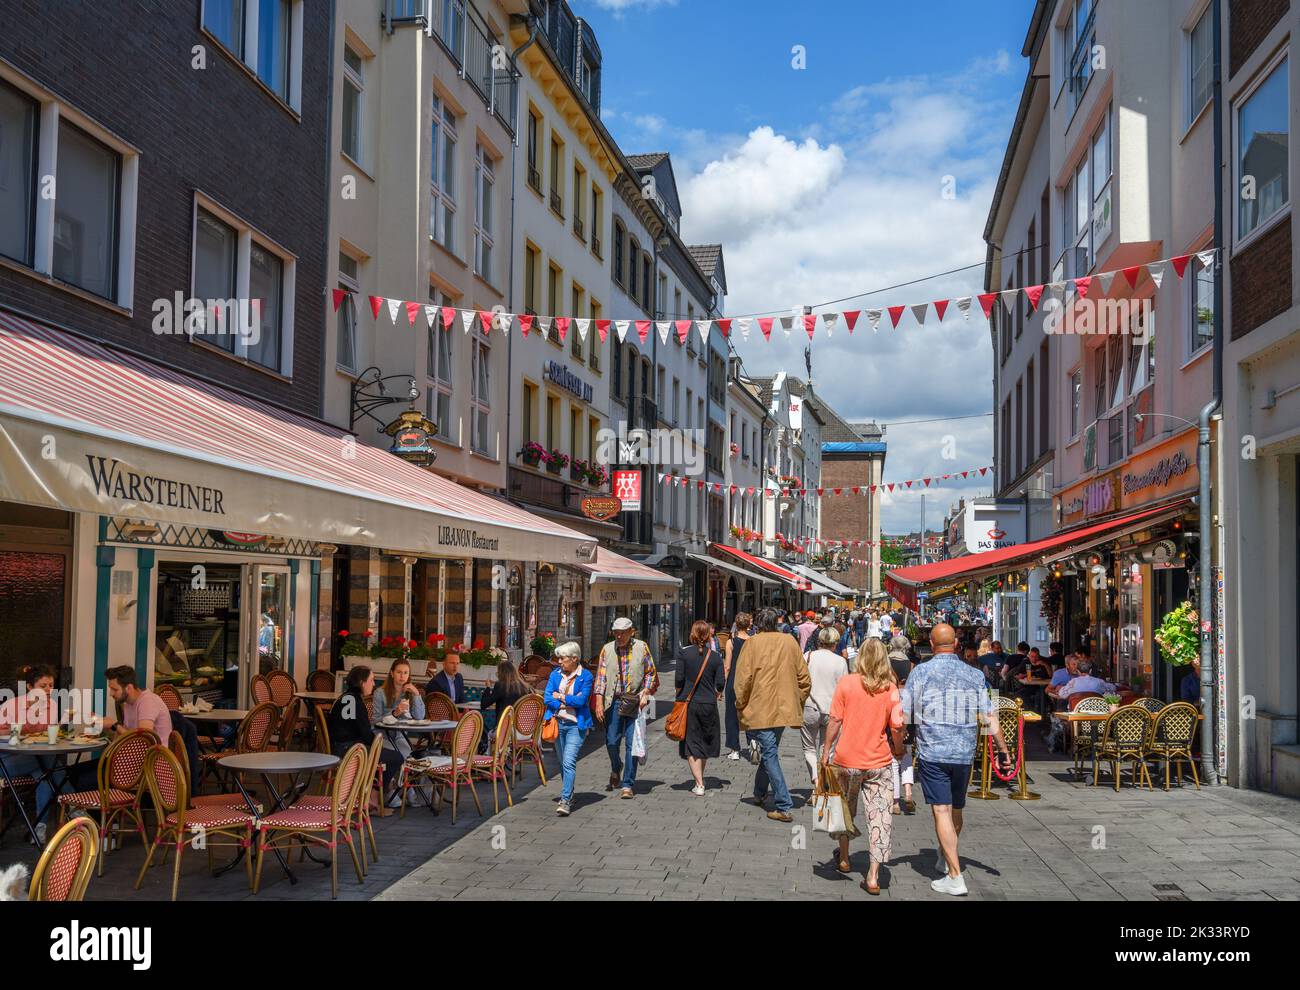 Berger Street in the Old Town centre, Dusseldorf, Germany Stock Photo